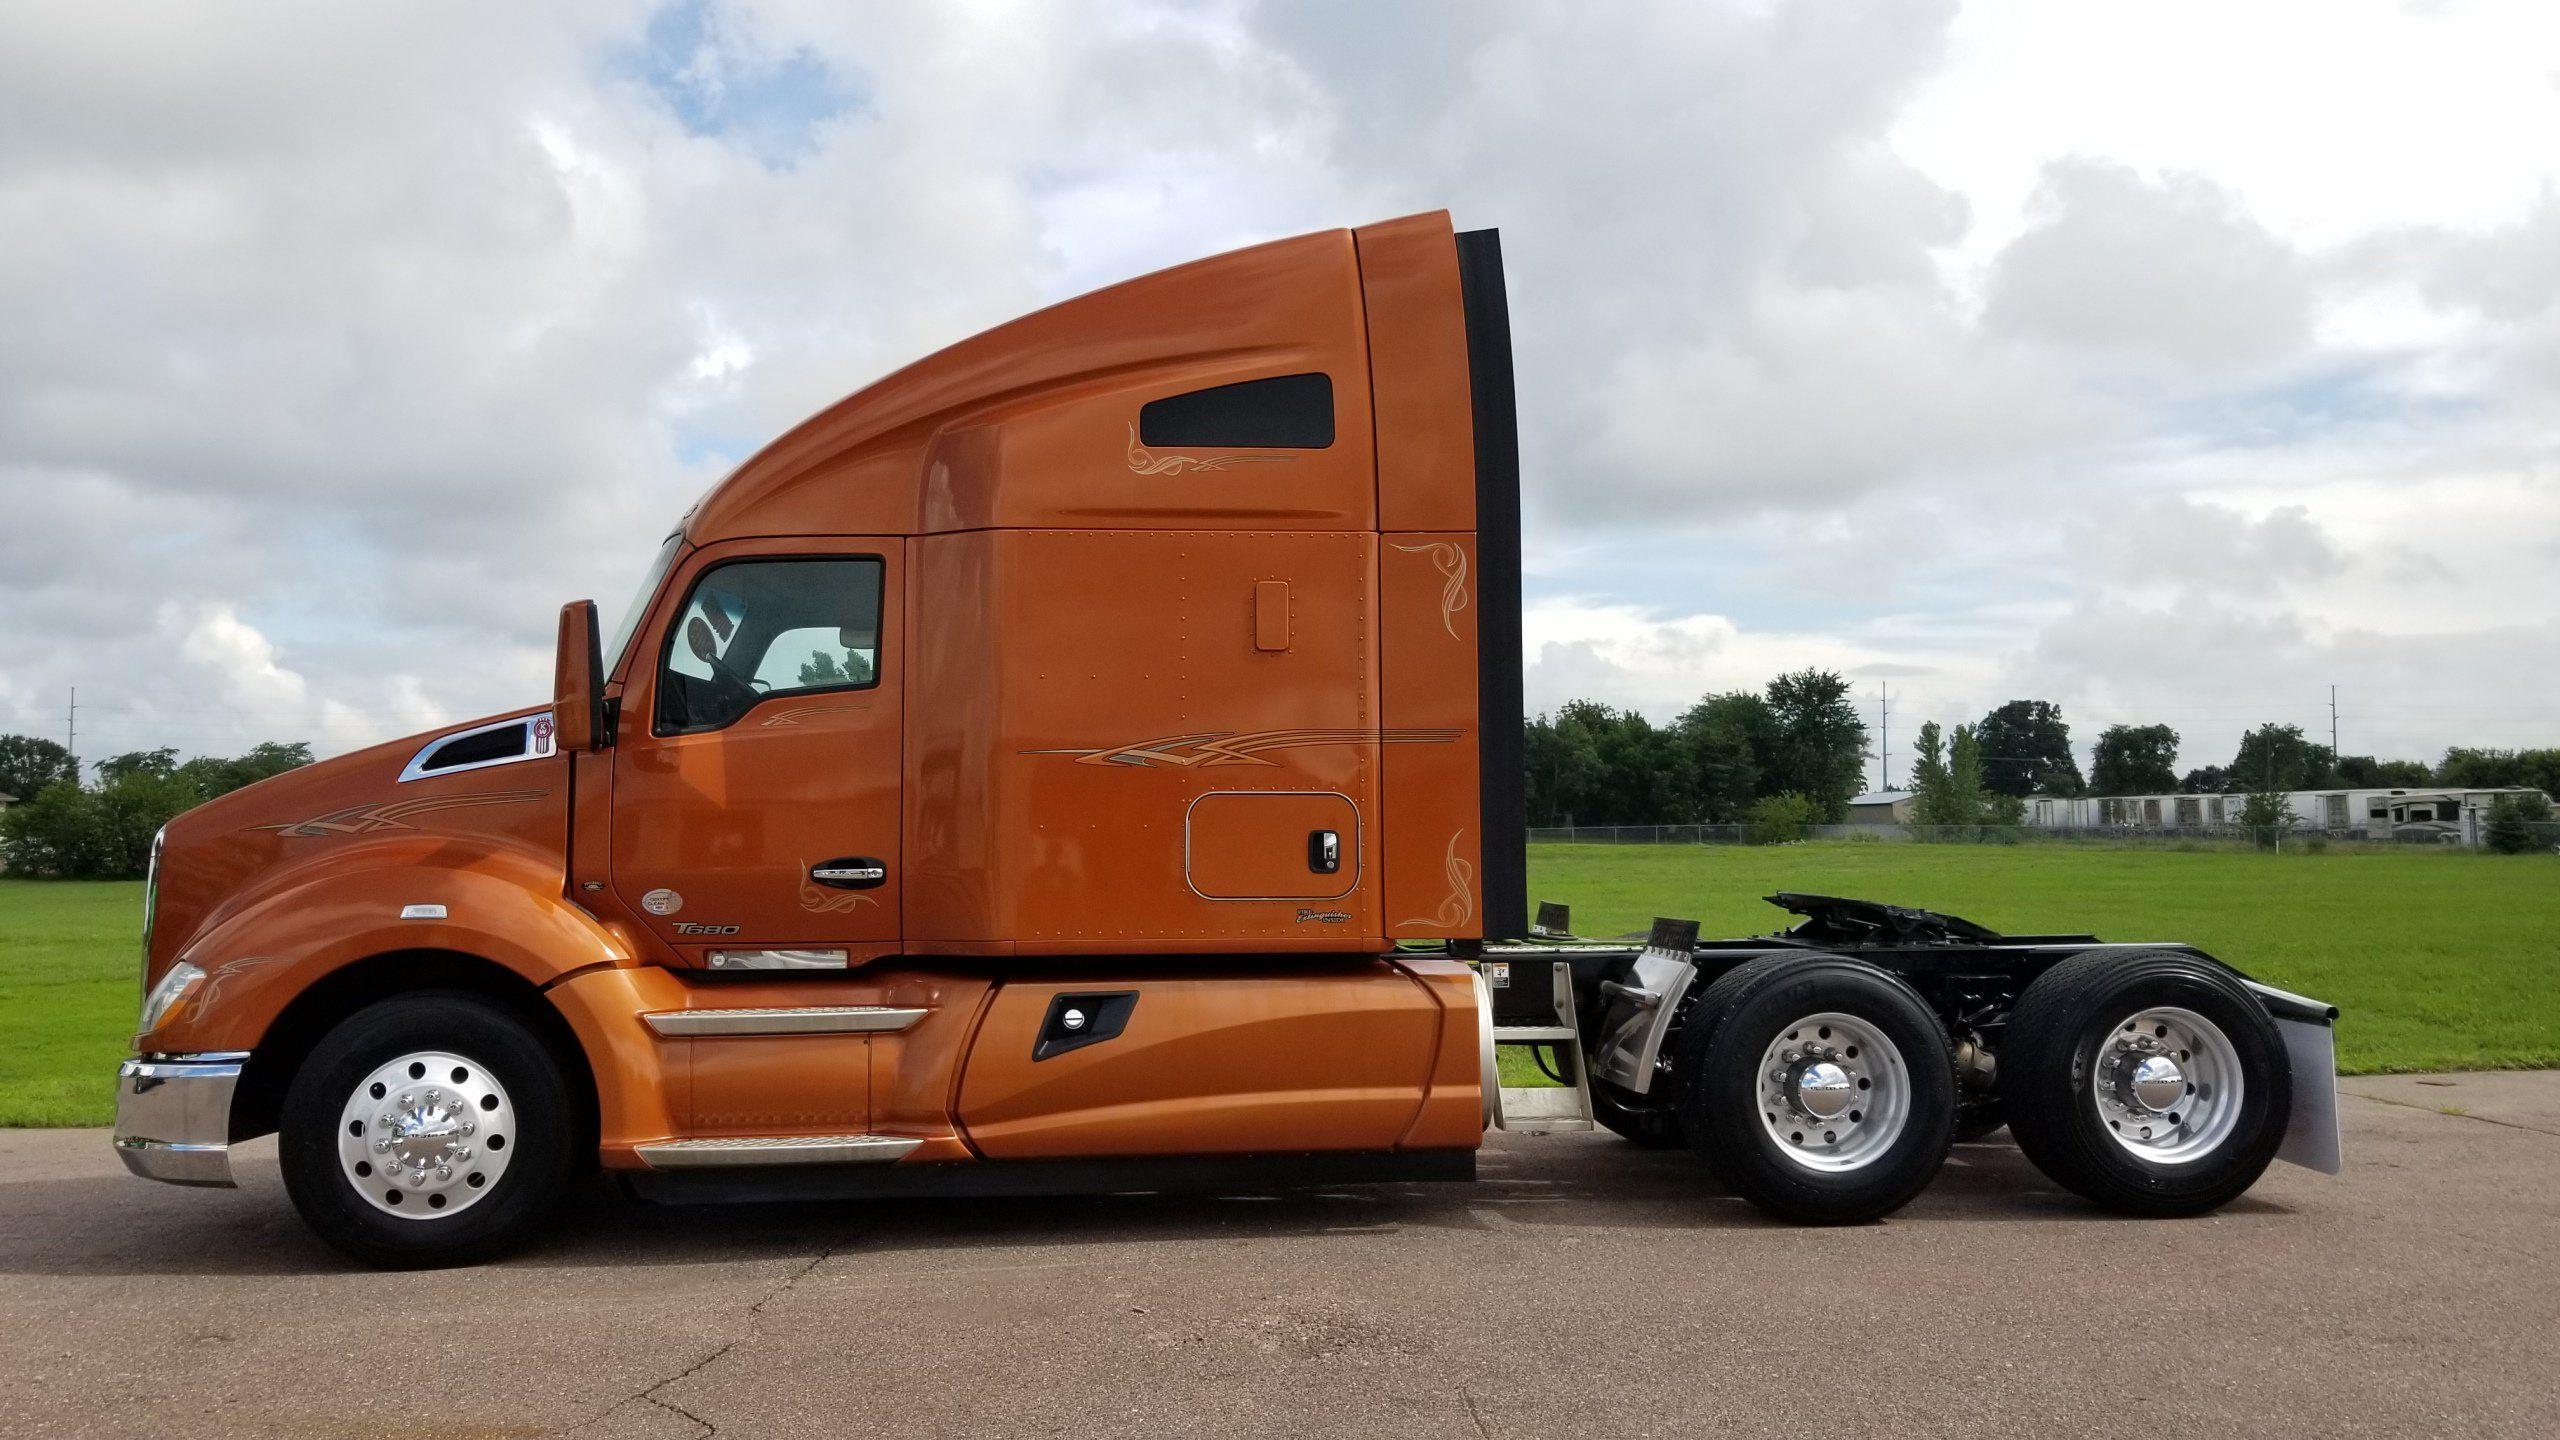 USED T680 KW JUST IN of Sioux Falls